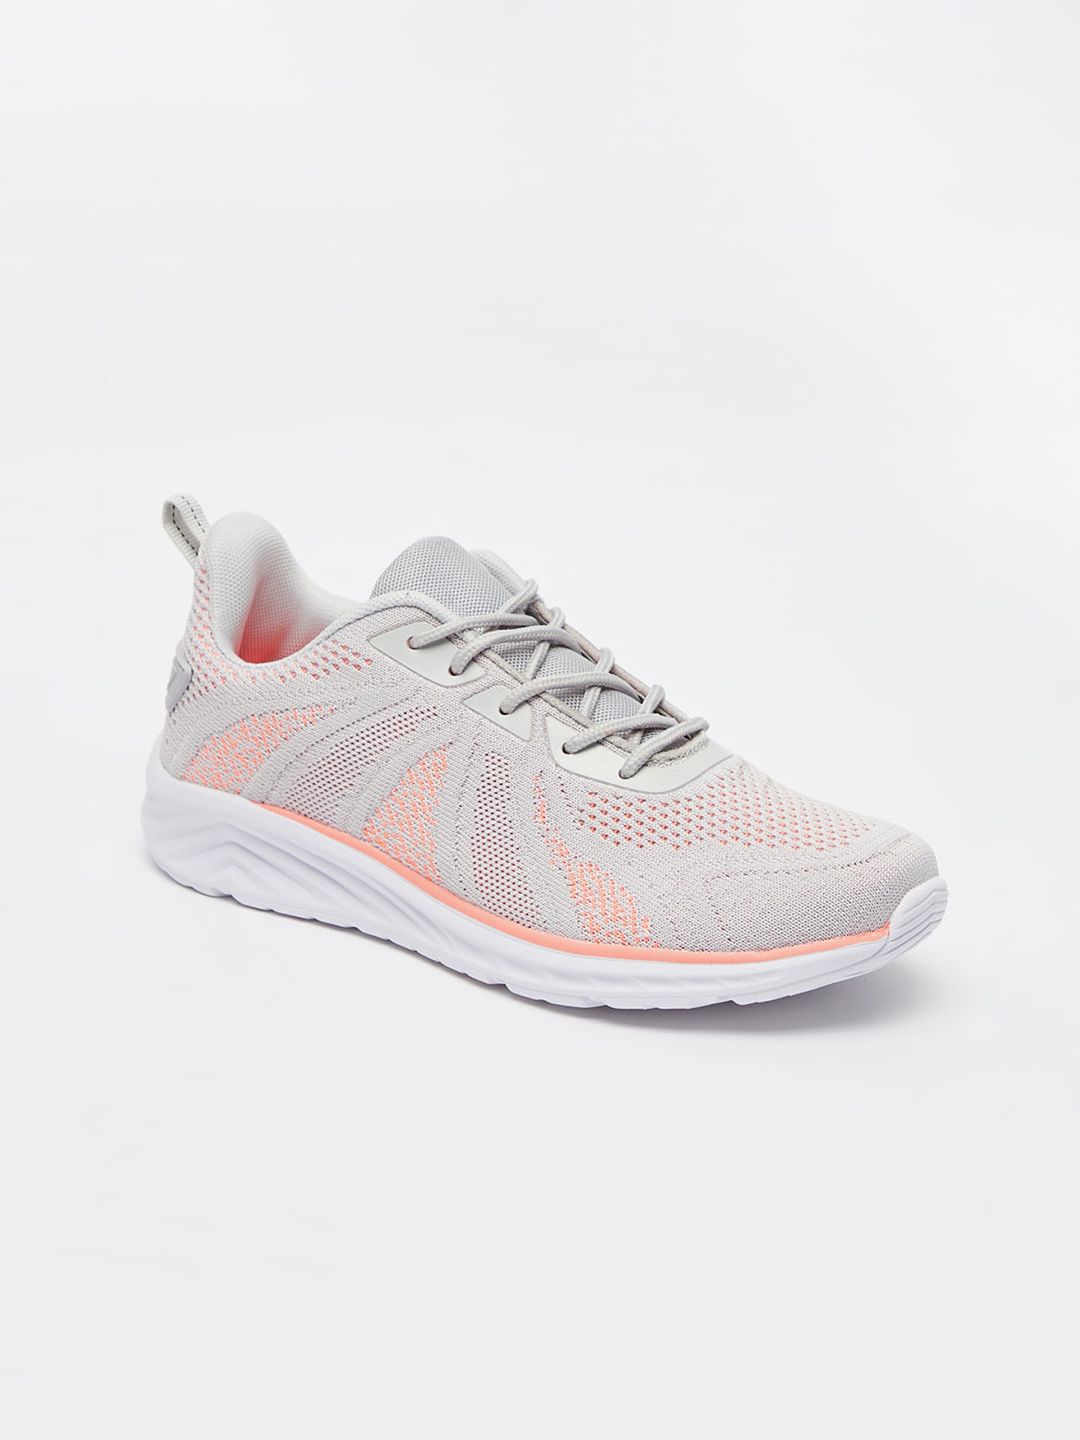 shoexpress Women Grey Textile Training or Gym Non-Marking Shoes Price in India